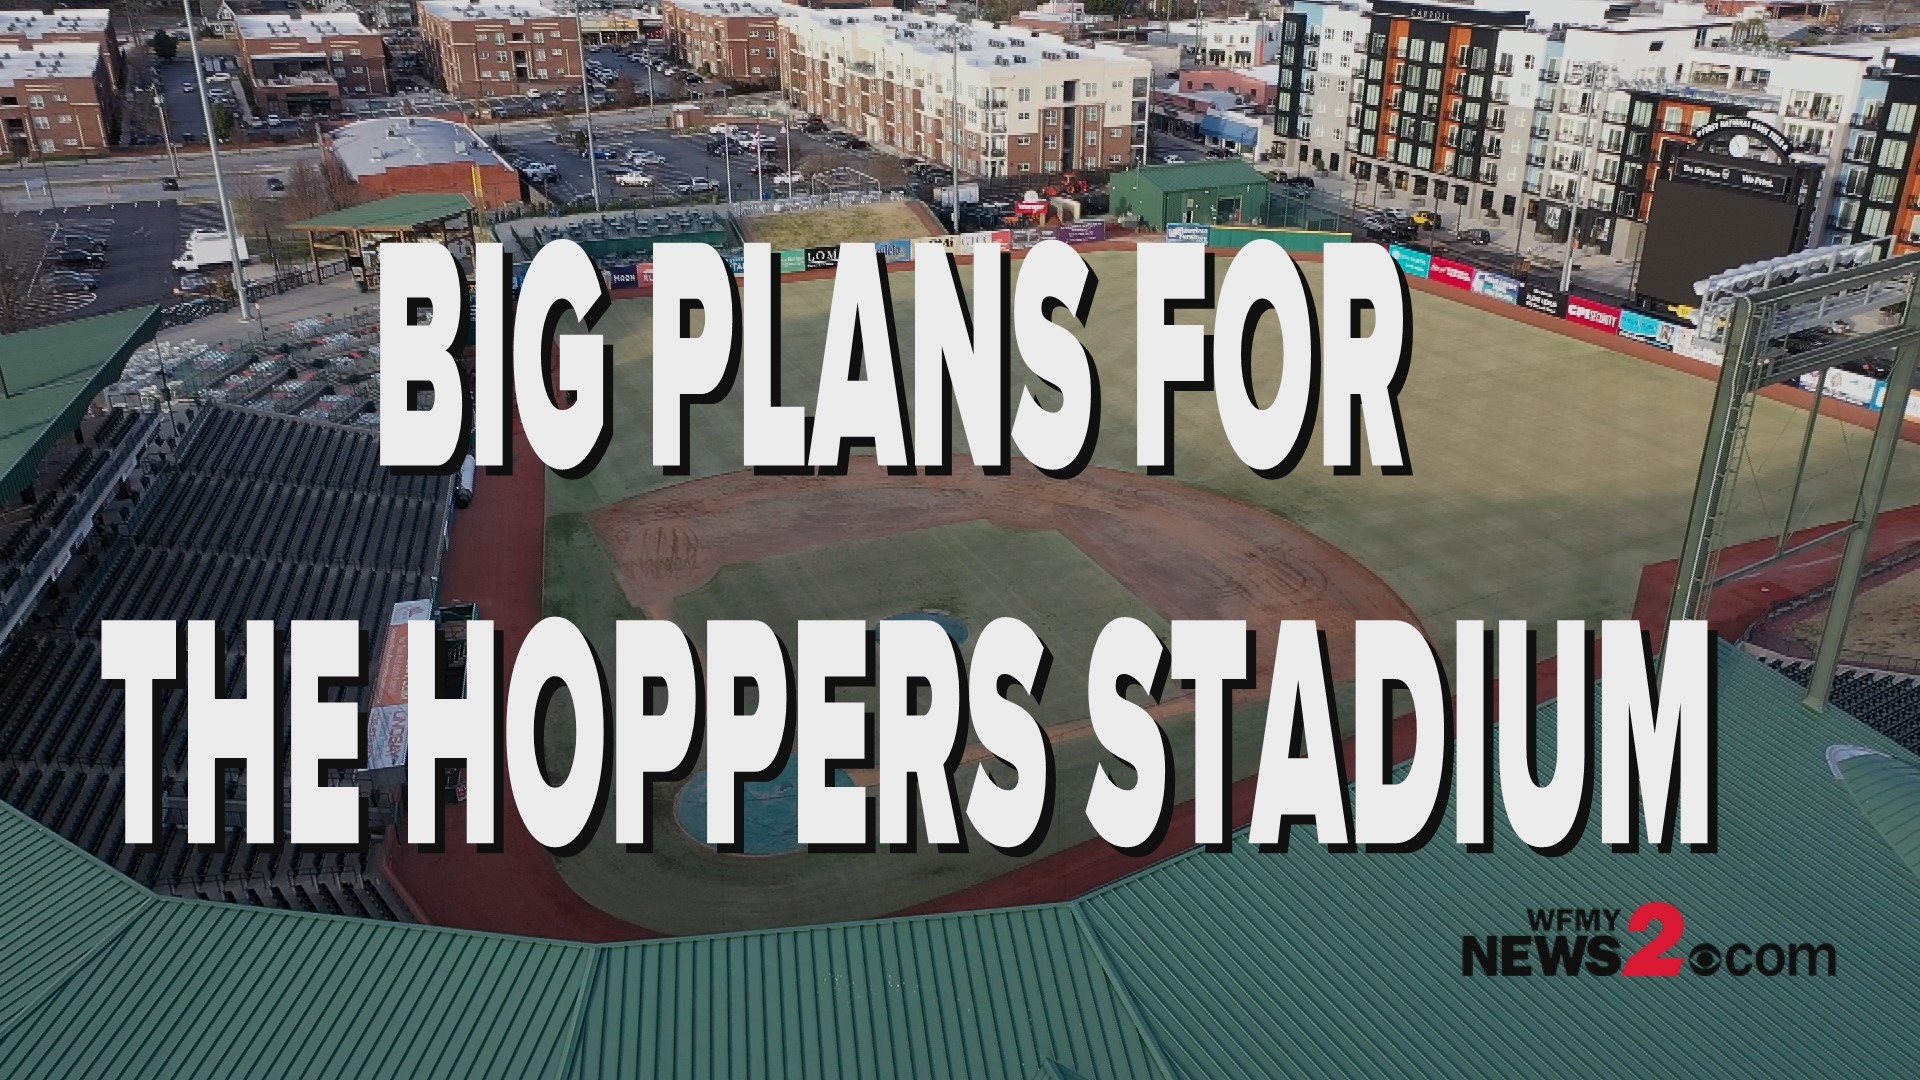 Andy Sandler said to expect constant changes and development at the stadium and in the surrounding area.